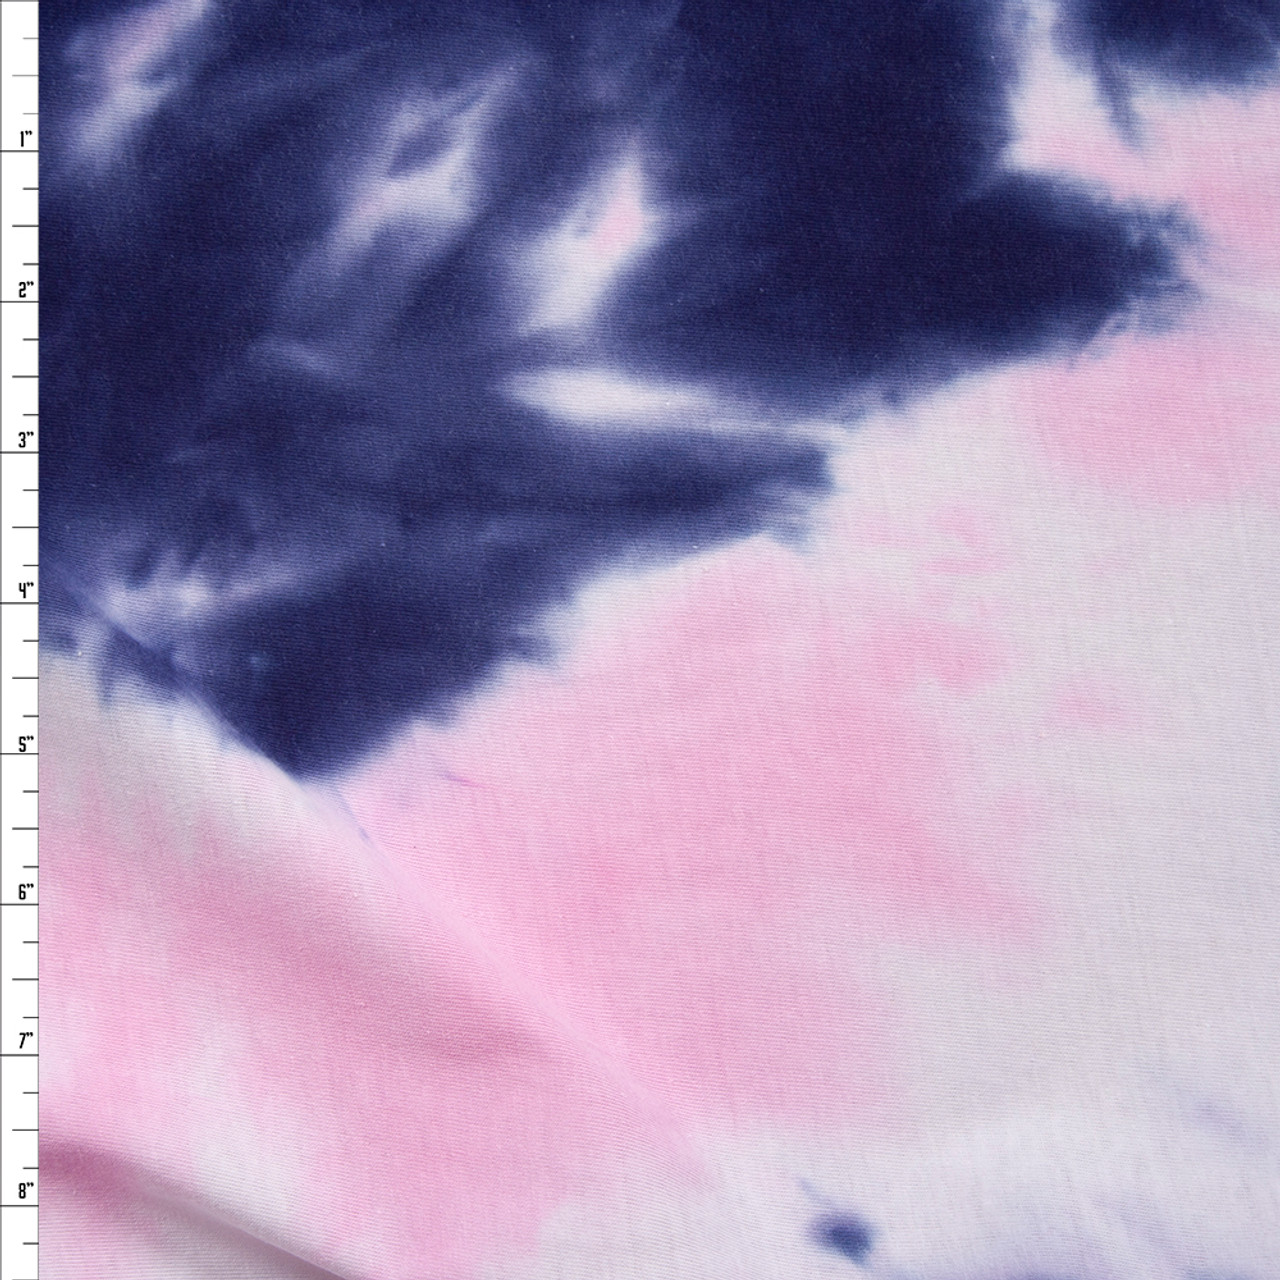 Cali Fabrics Pink, Navy, and White Tie Dye Cotton Jersey Fabric by the Yard